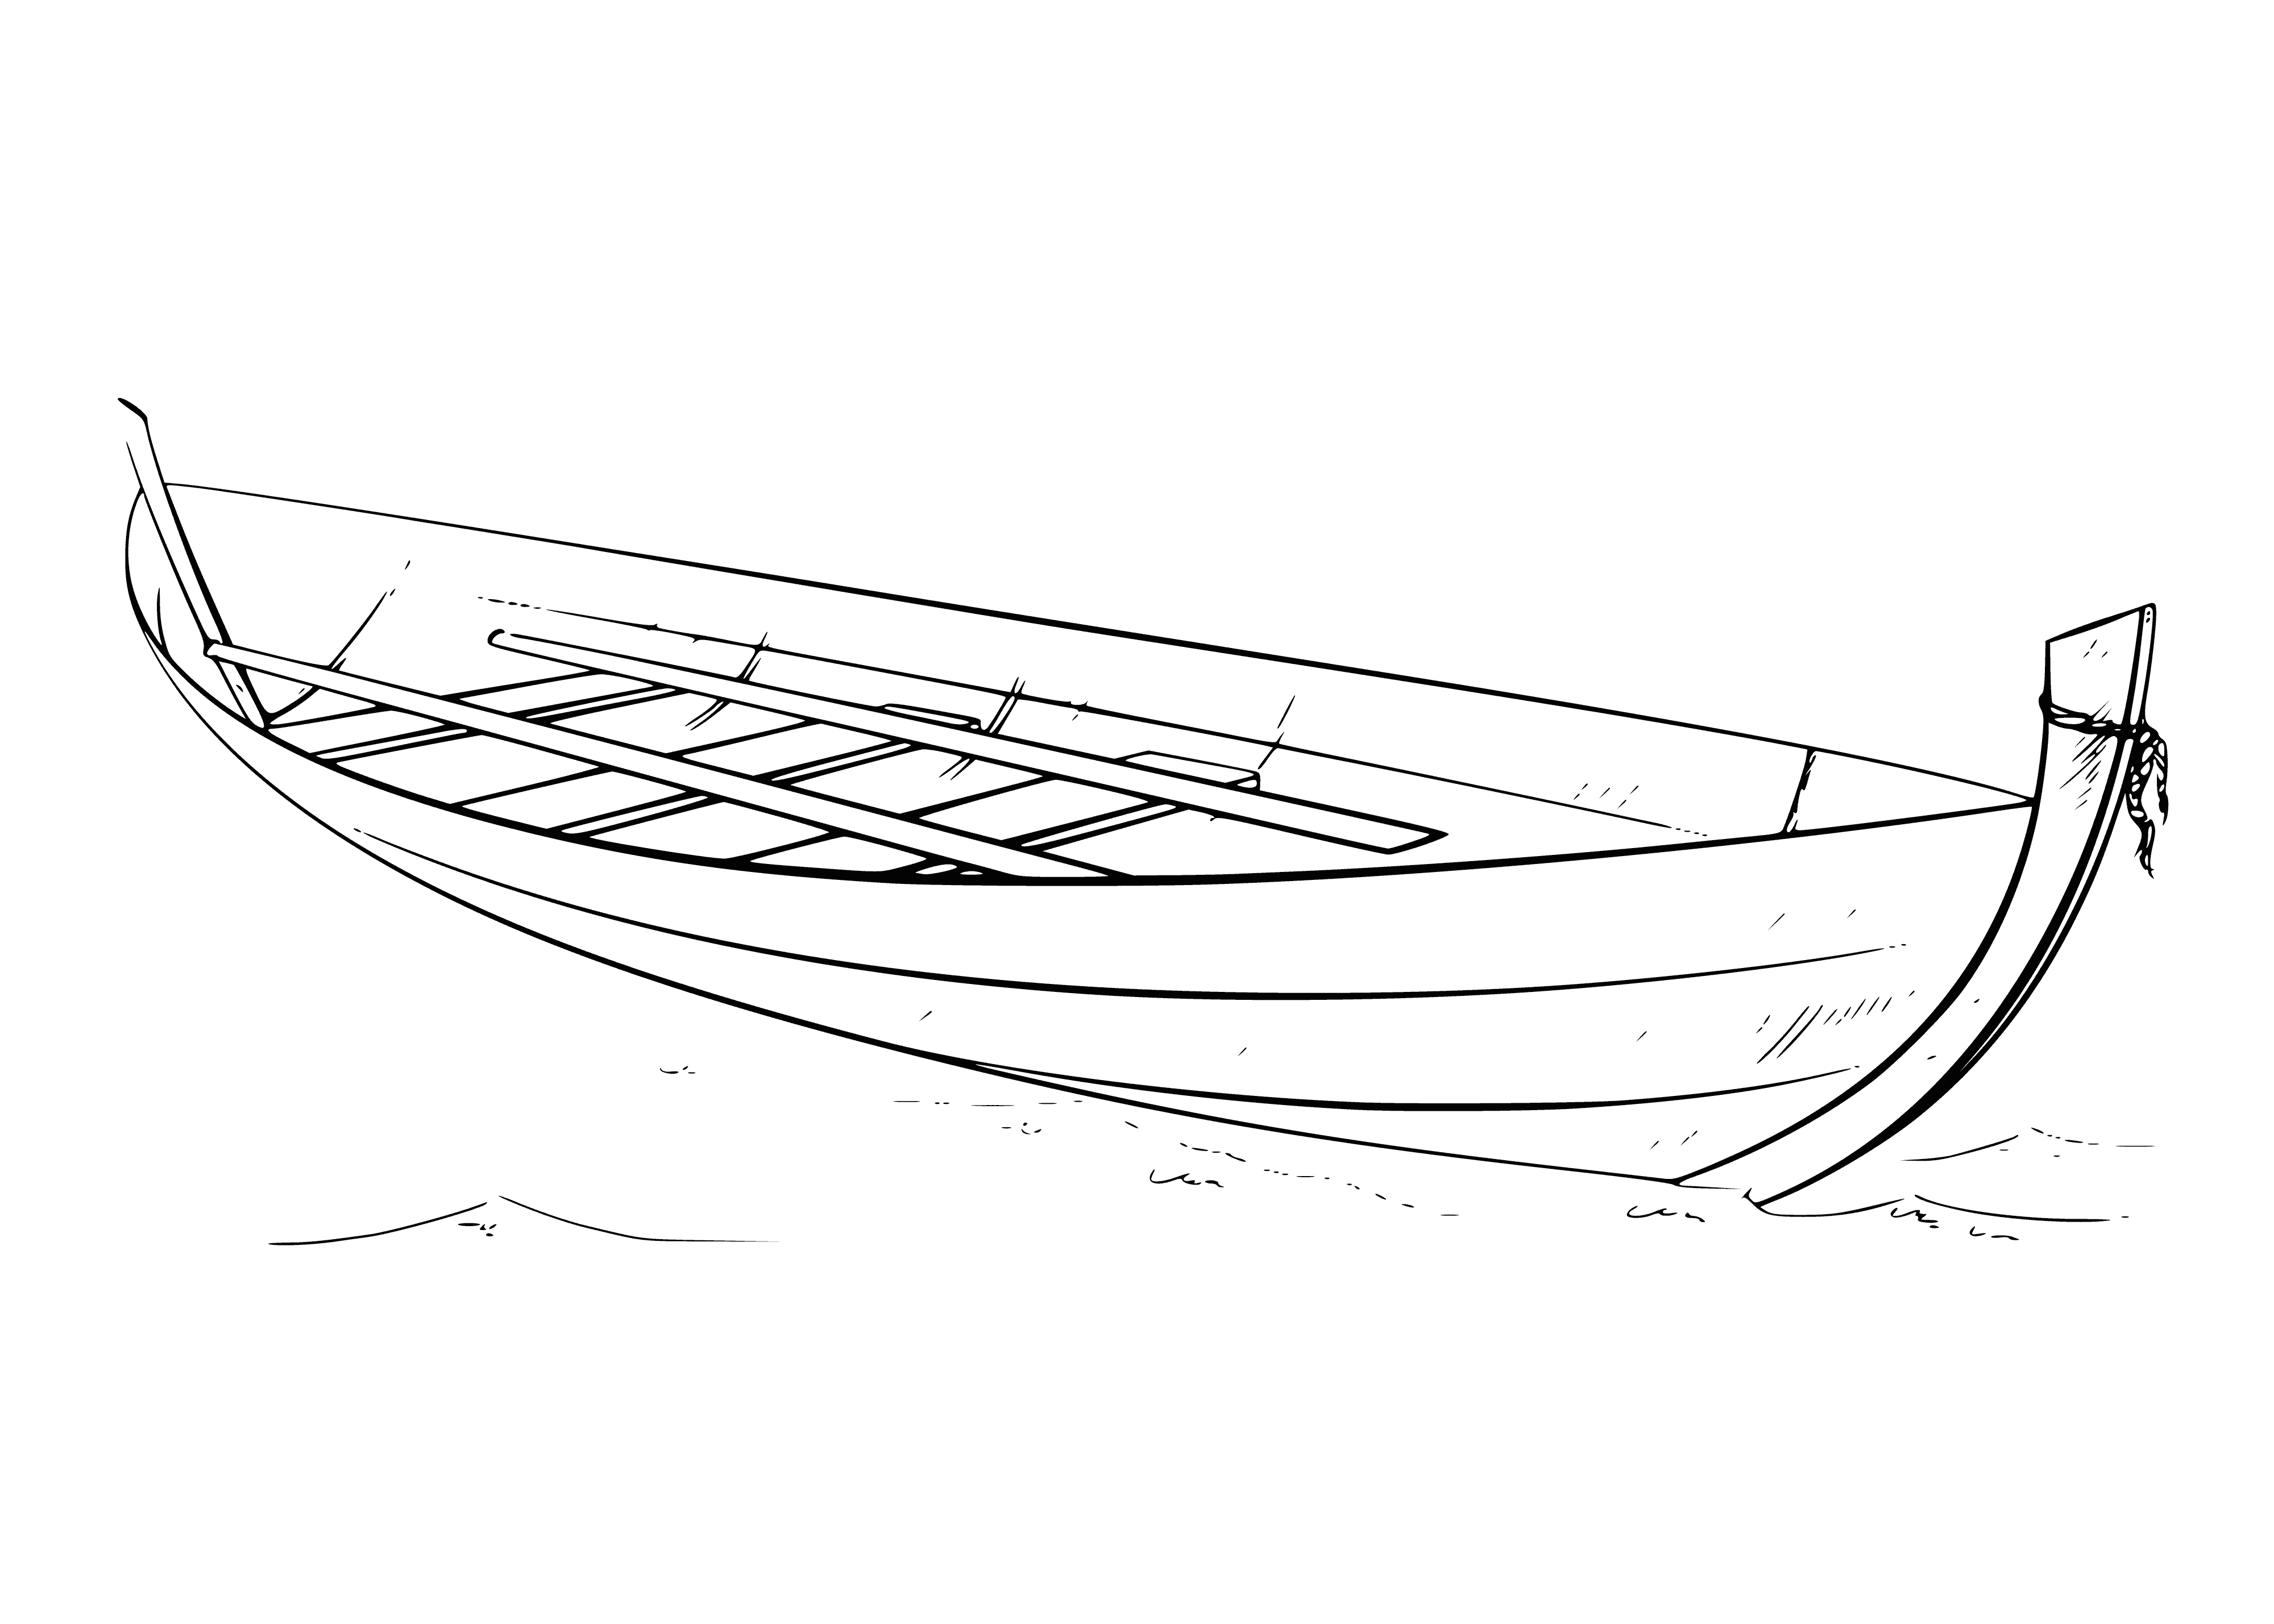 coloring page: Sailing through calm waters, a ship with sails down & oars out shown on the coloring page.